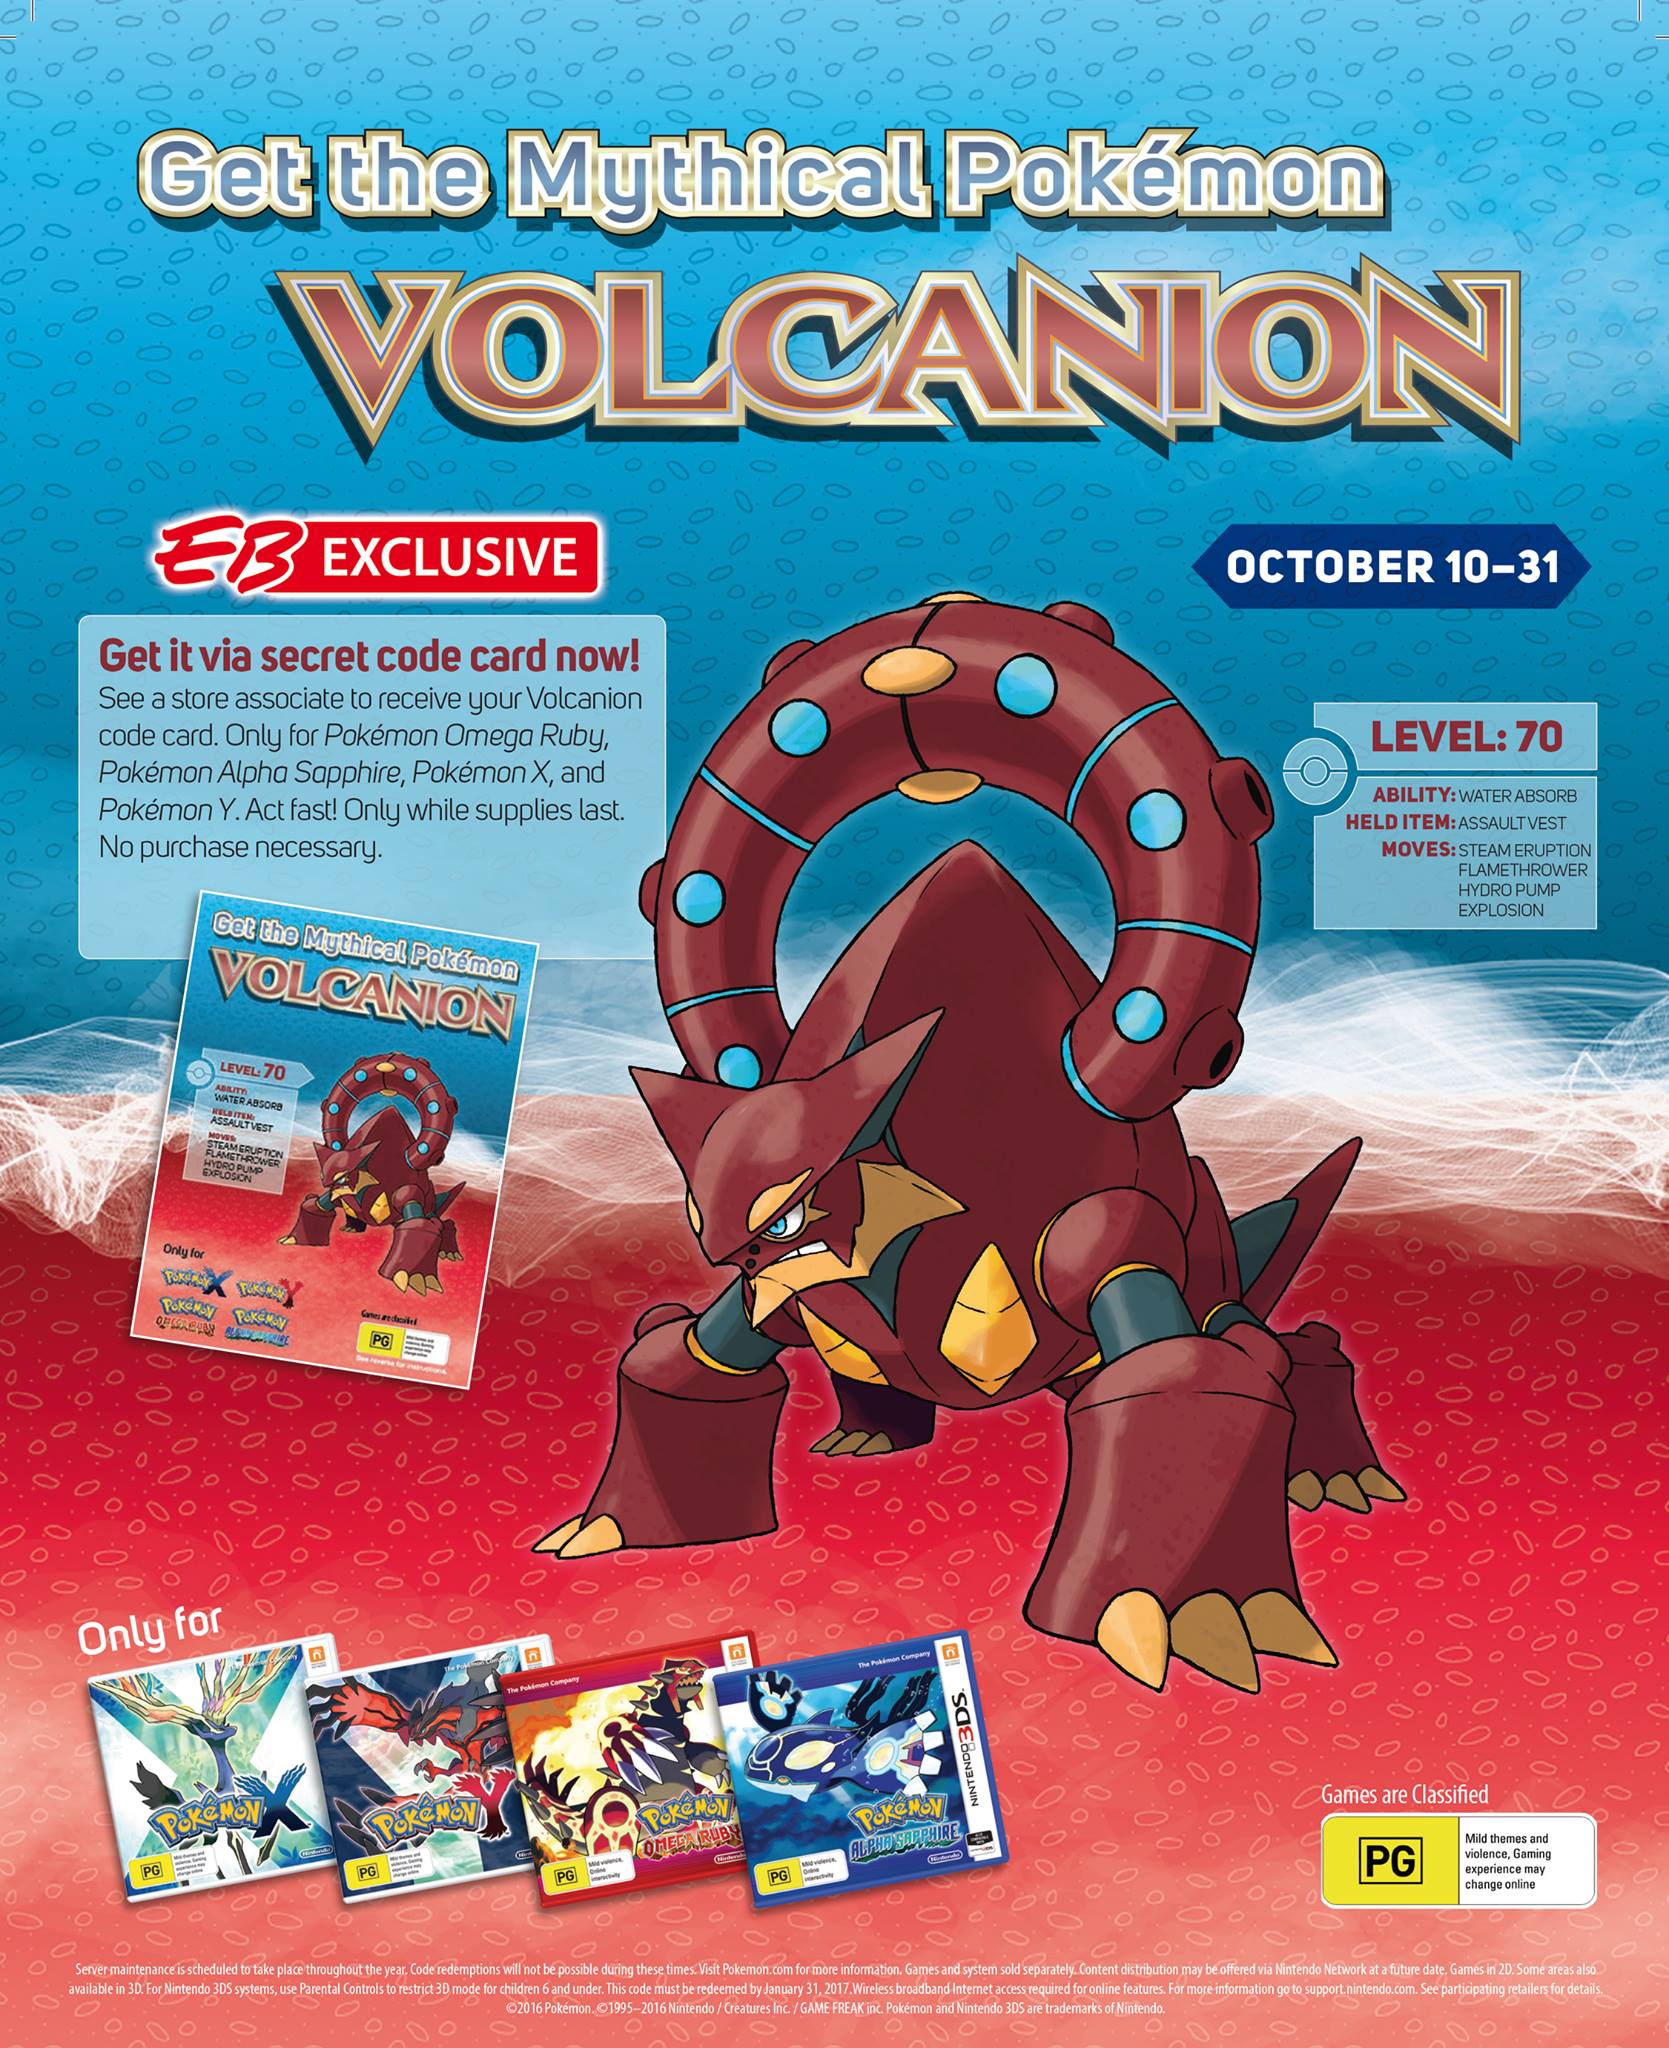 Get the Mythical Volcanion at your local GameStop Push Start